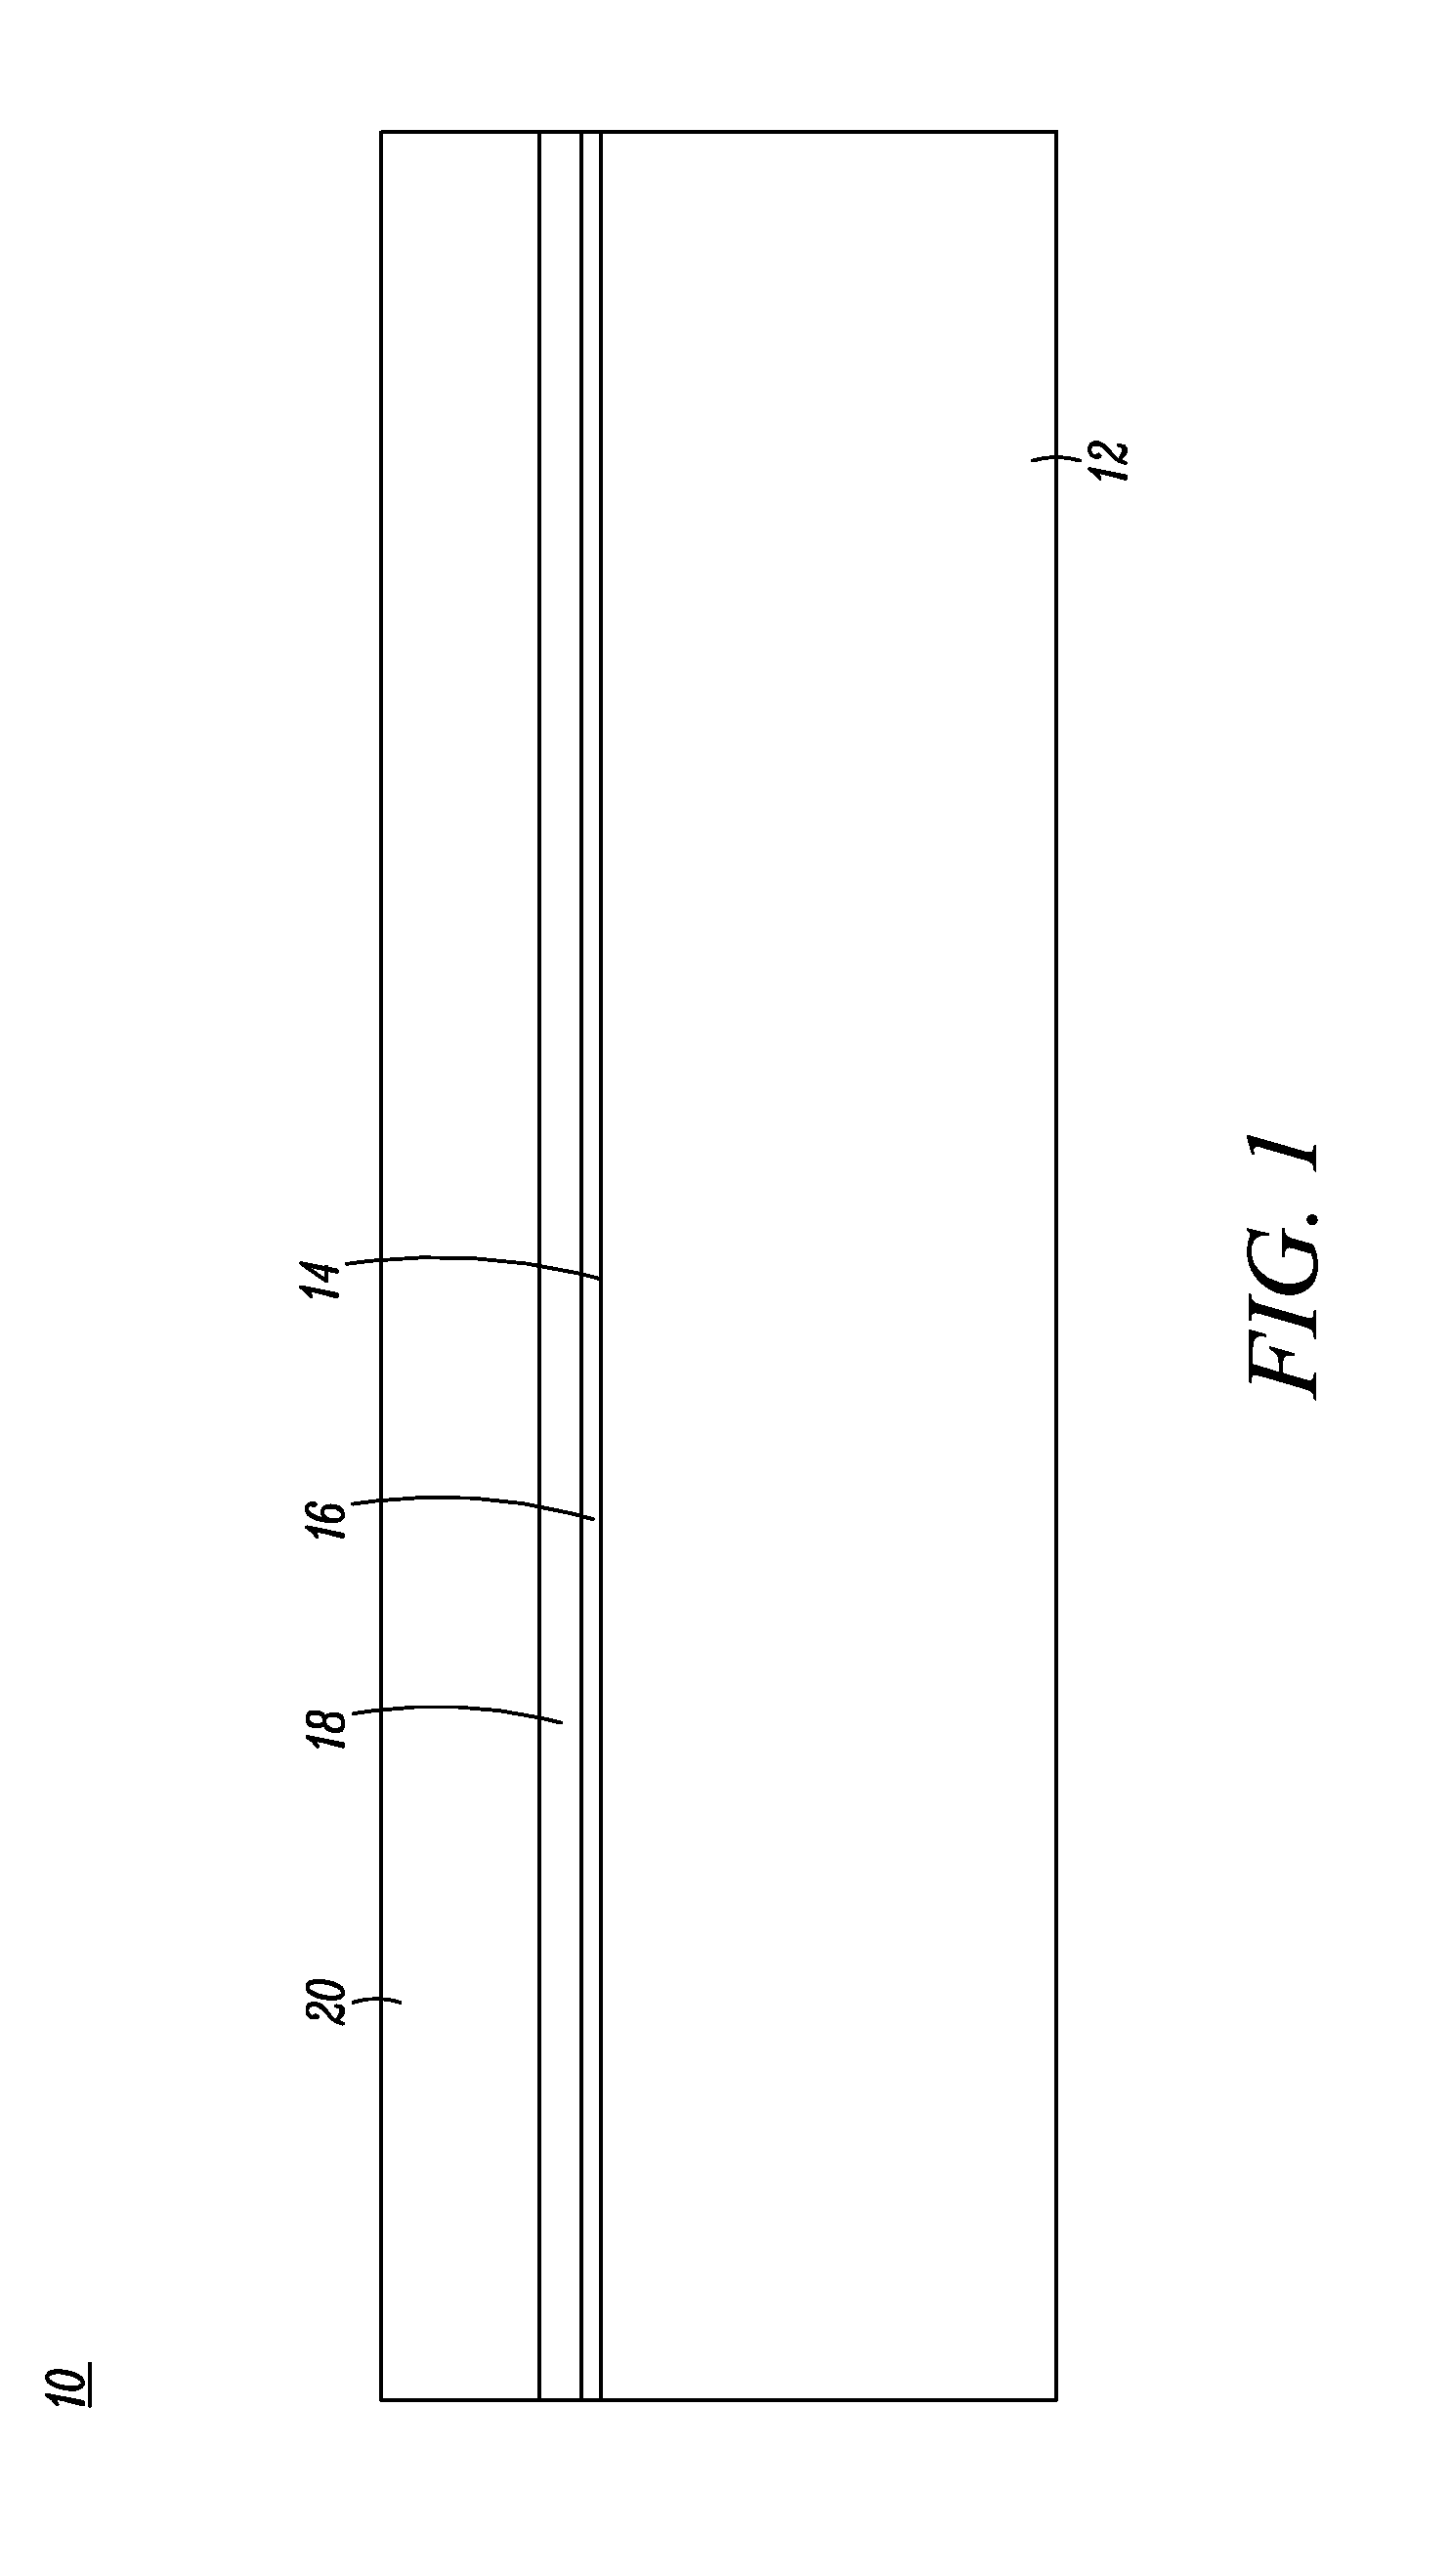 RF power transistor structure and a method of forming the same